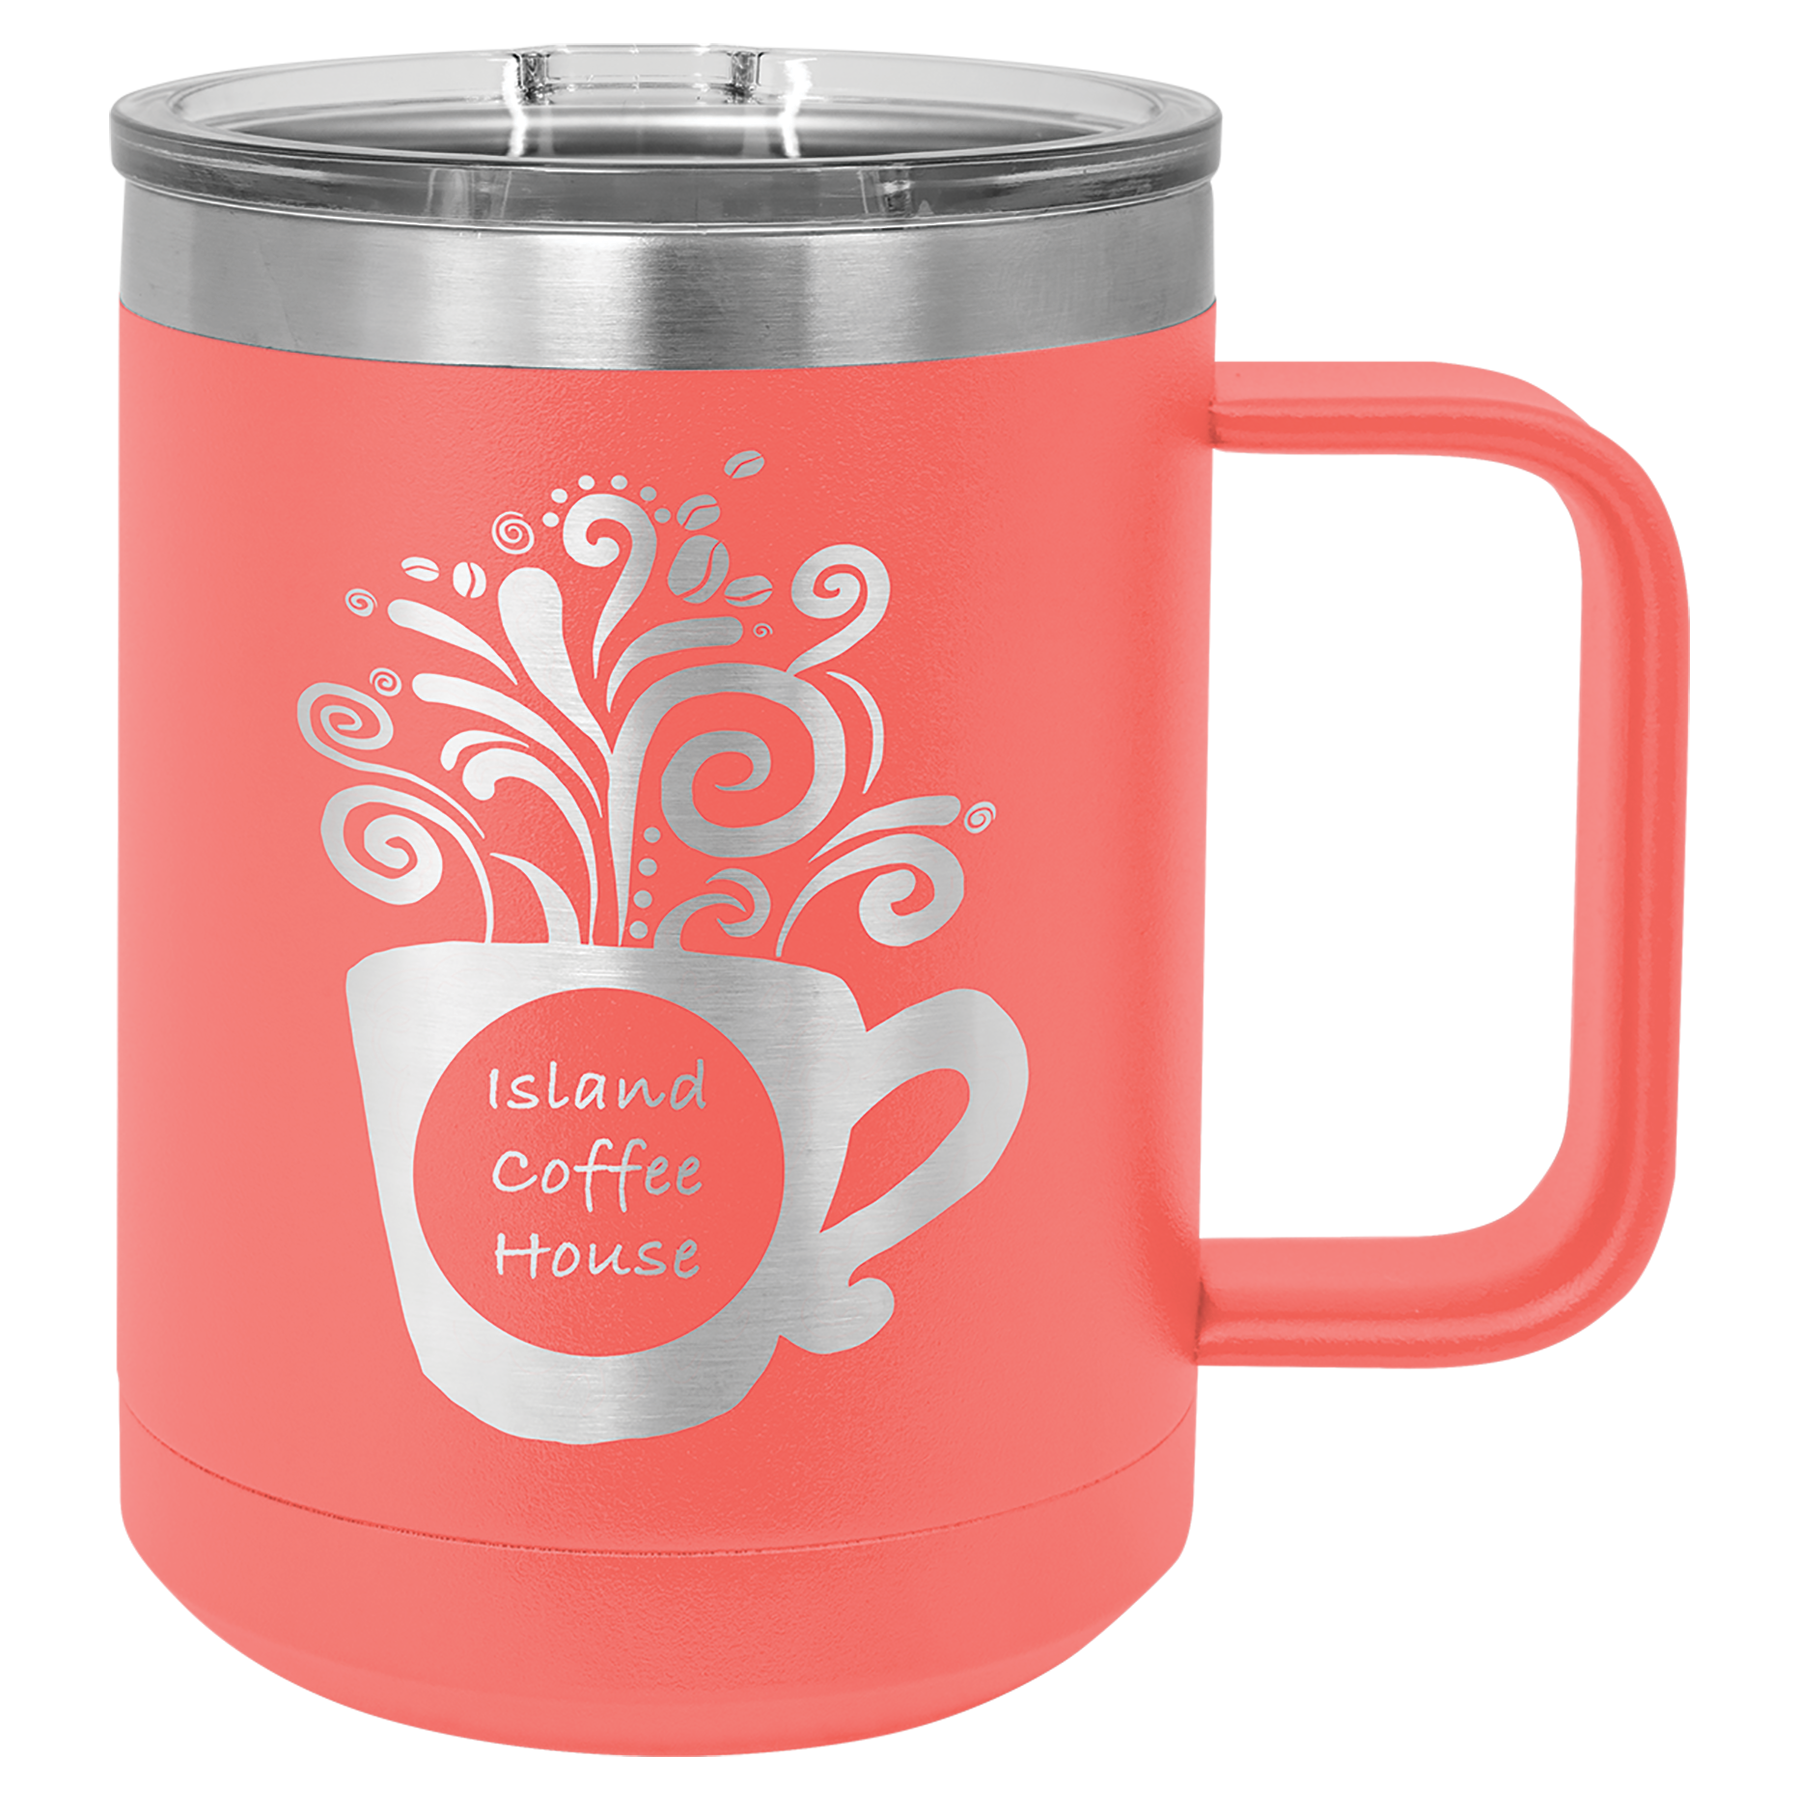 Personalized Red Travel Coffee Mug With Handle